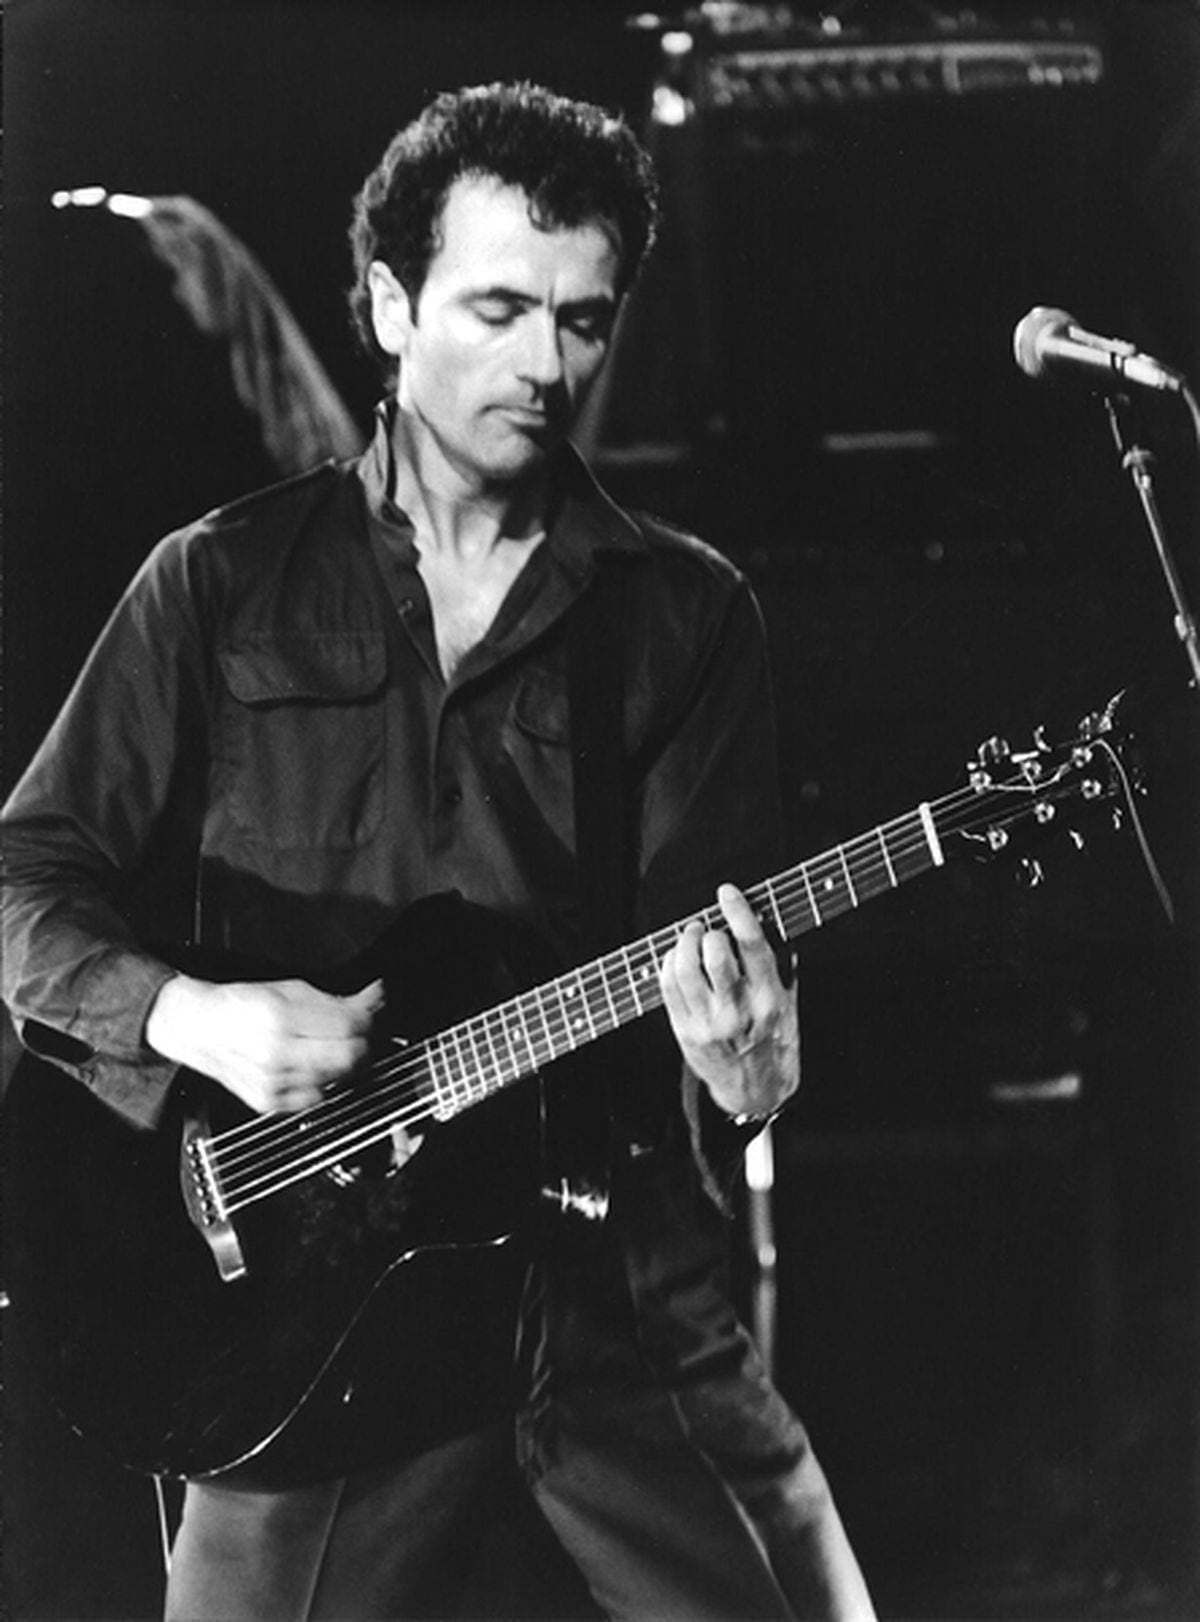 Hugh was the frontman and main songwriter for The Stranglers for 16 years